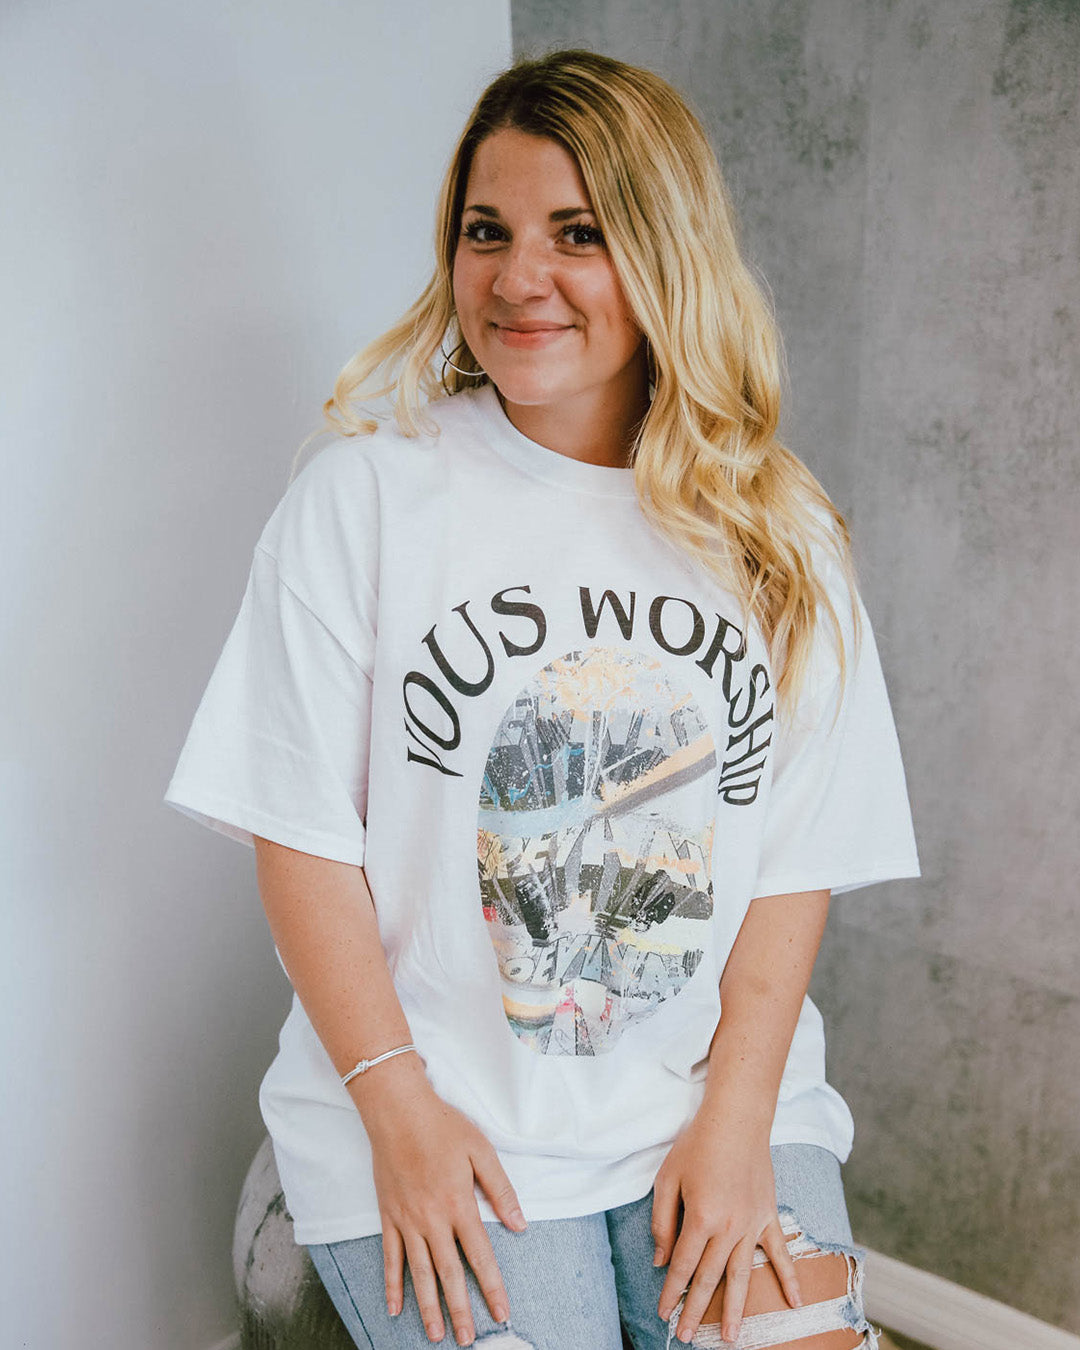 VOUS Worship Revival Tee